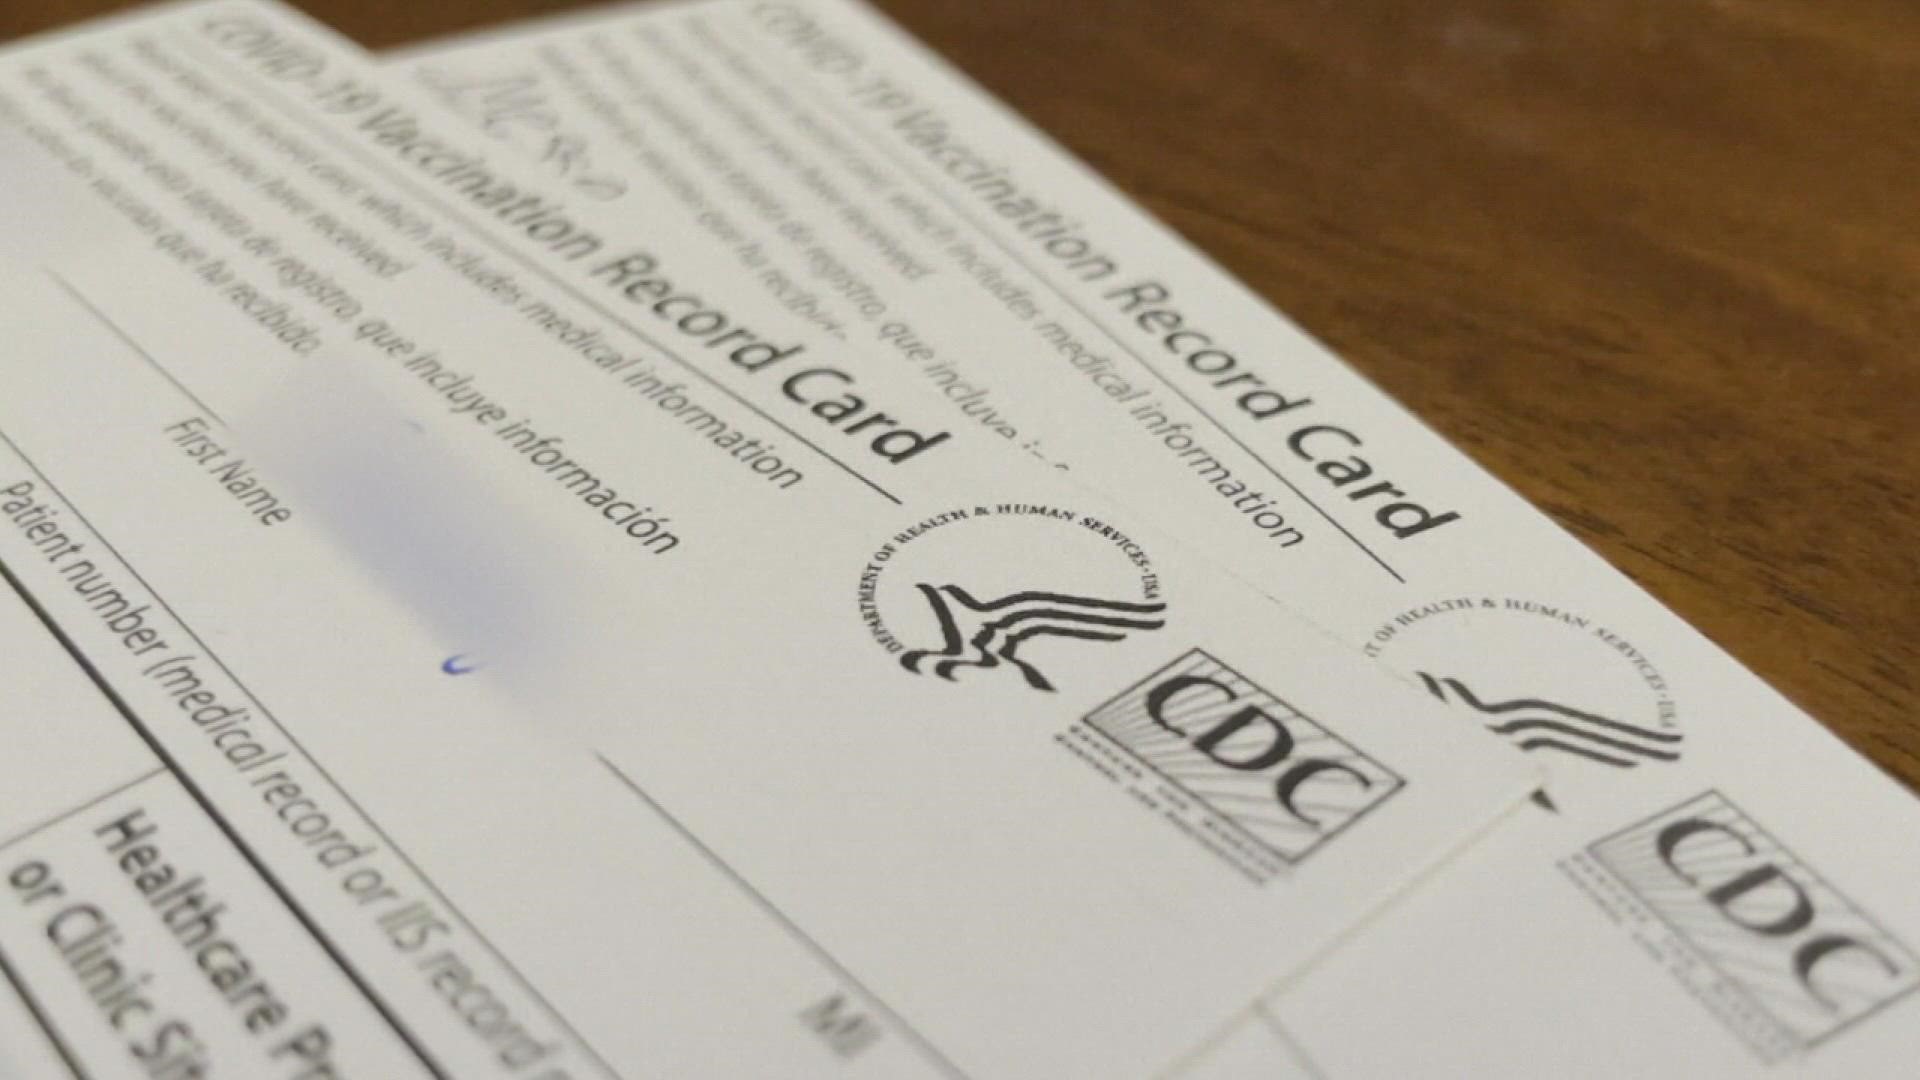 The black market for fake vaccination cards is booming.